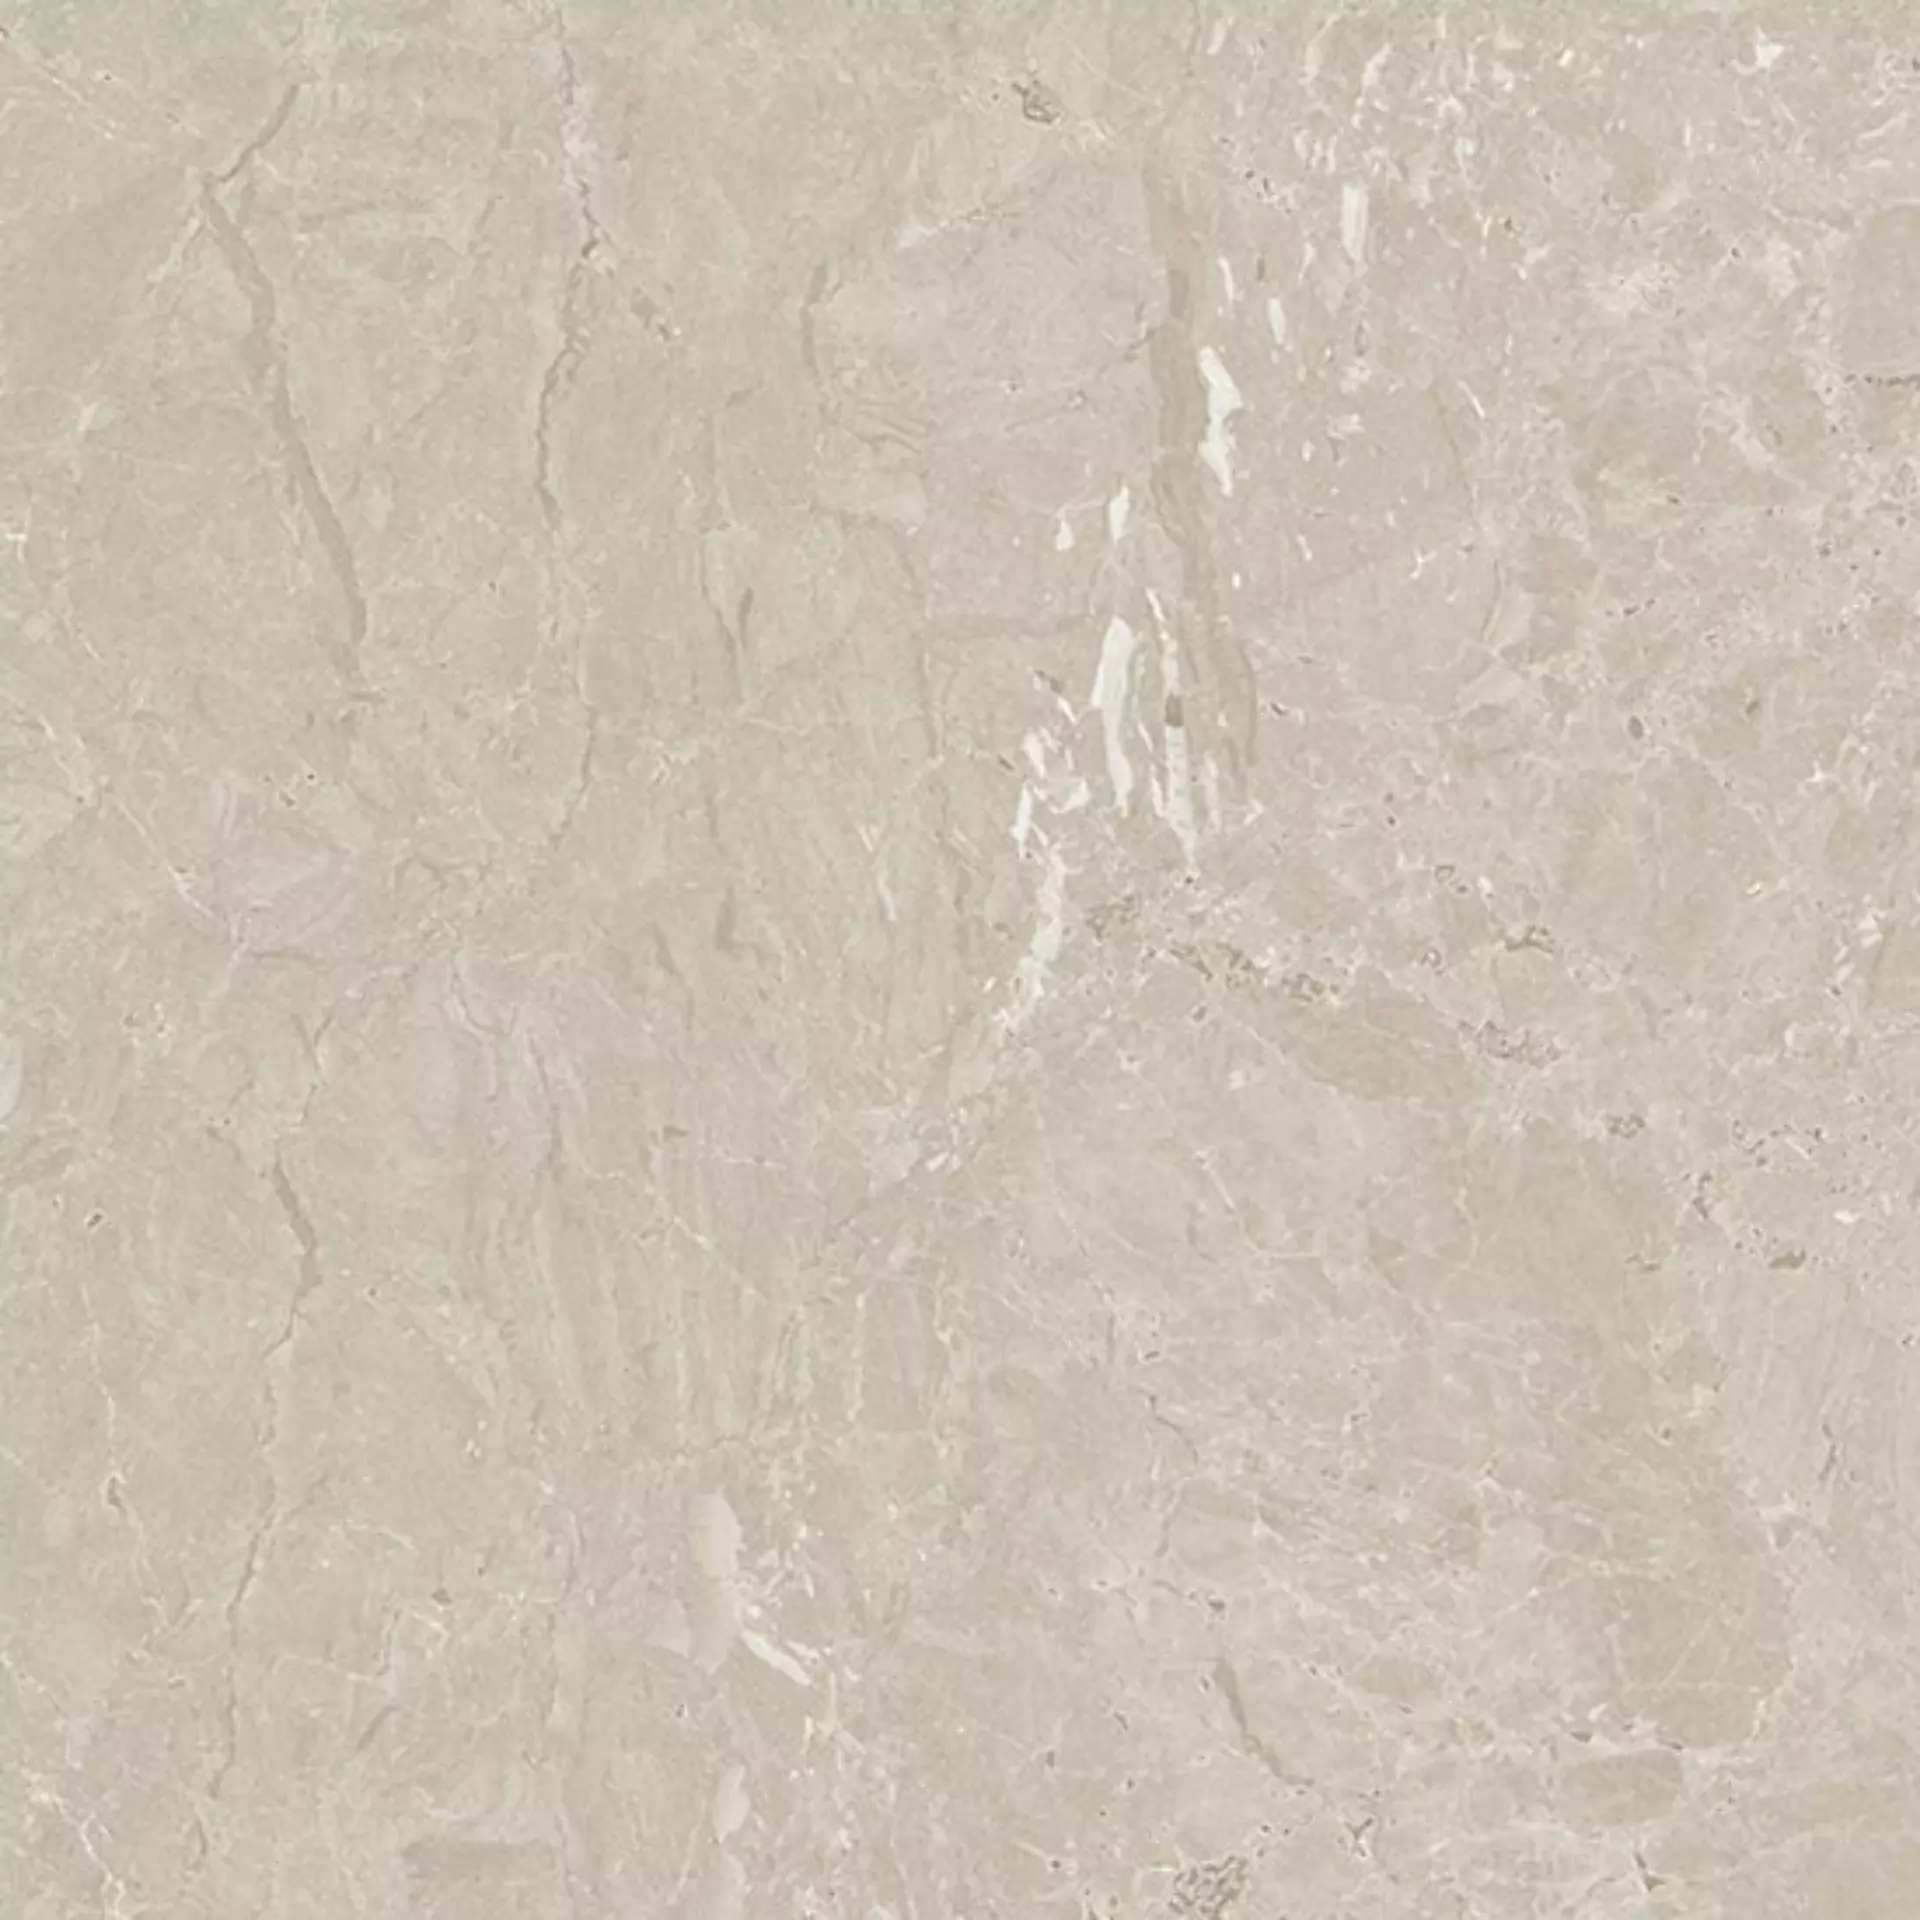 Fioranese Mashup Dolomia Greige Naturale 0DI904R 90x90cm rectified 9mm